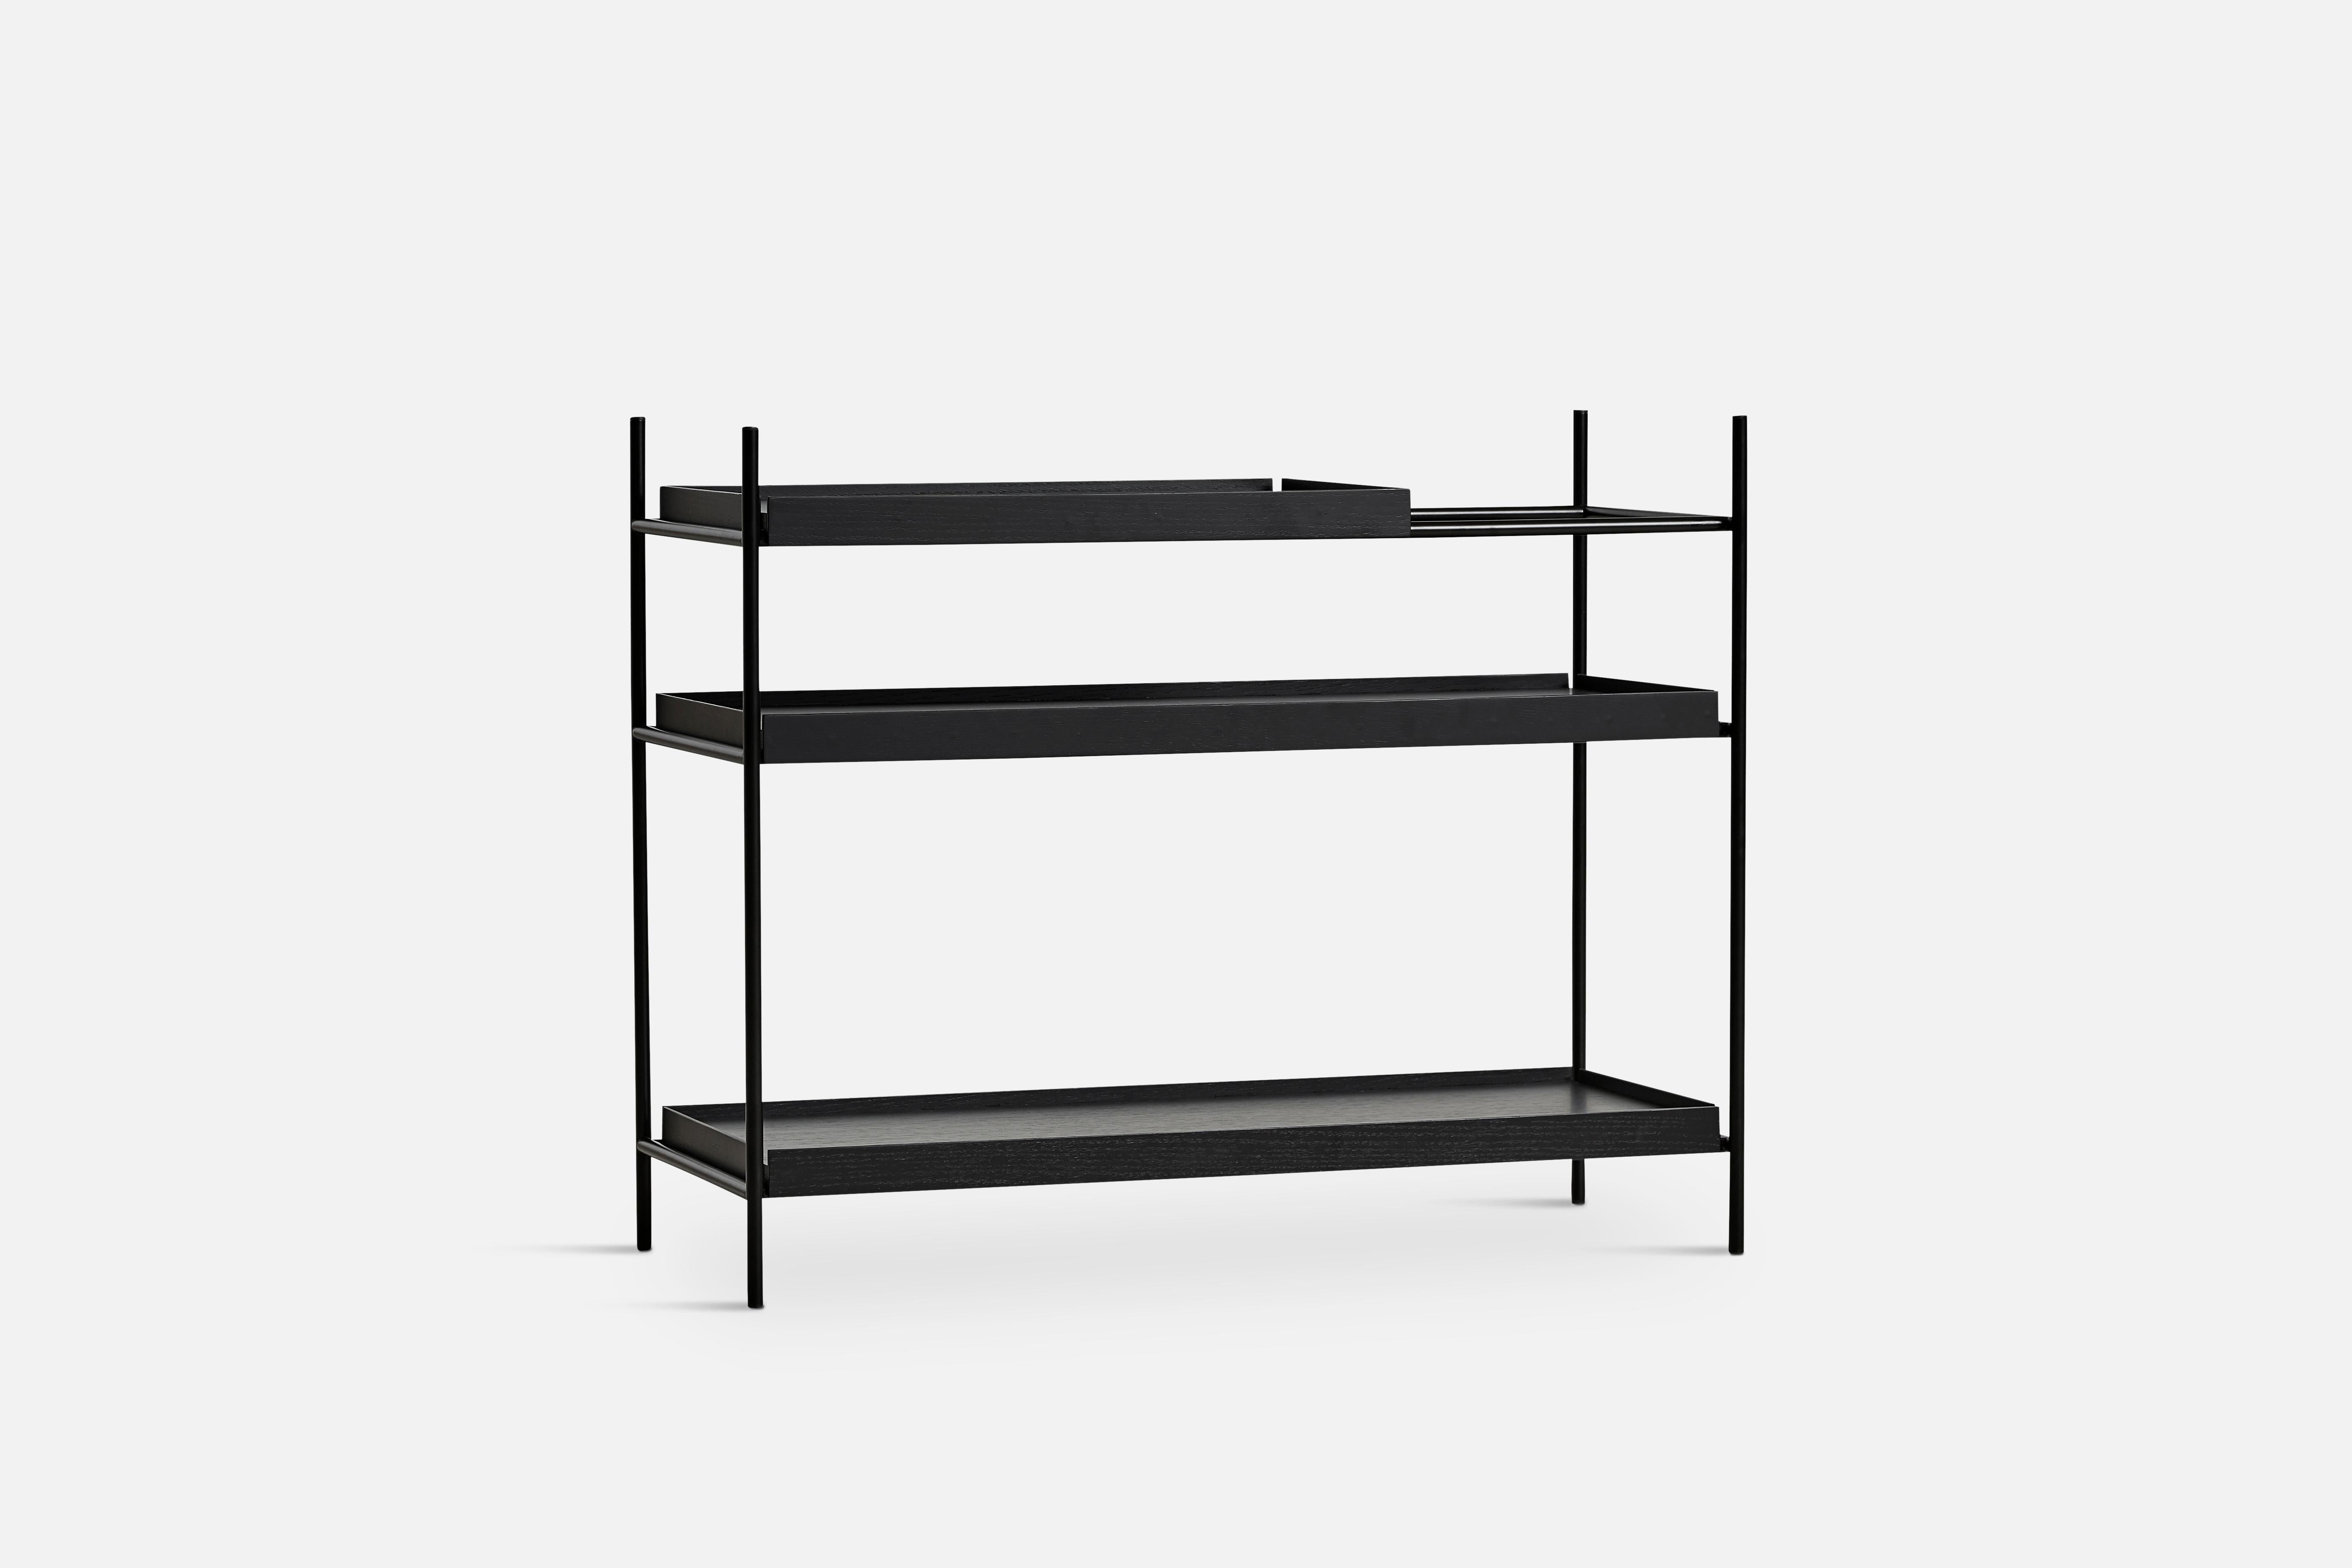 Low black oak tray shelf by Hanne Willmann
Materials: metal, oak.
Dimensions: D 40 x W 100 x H 81 cm
Also available in different tray conbinations and 2 sizes: H81, H 201 cm.

Hanne Willmann is a dynamic German designer with her own